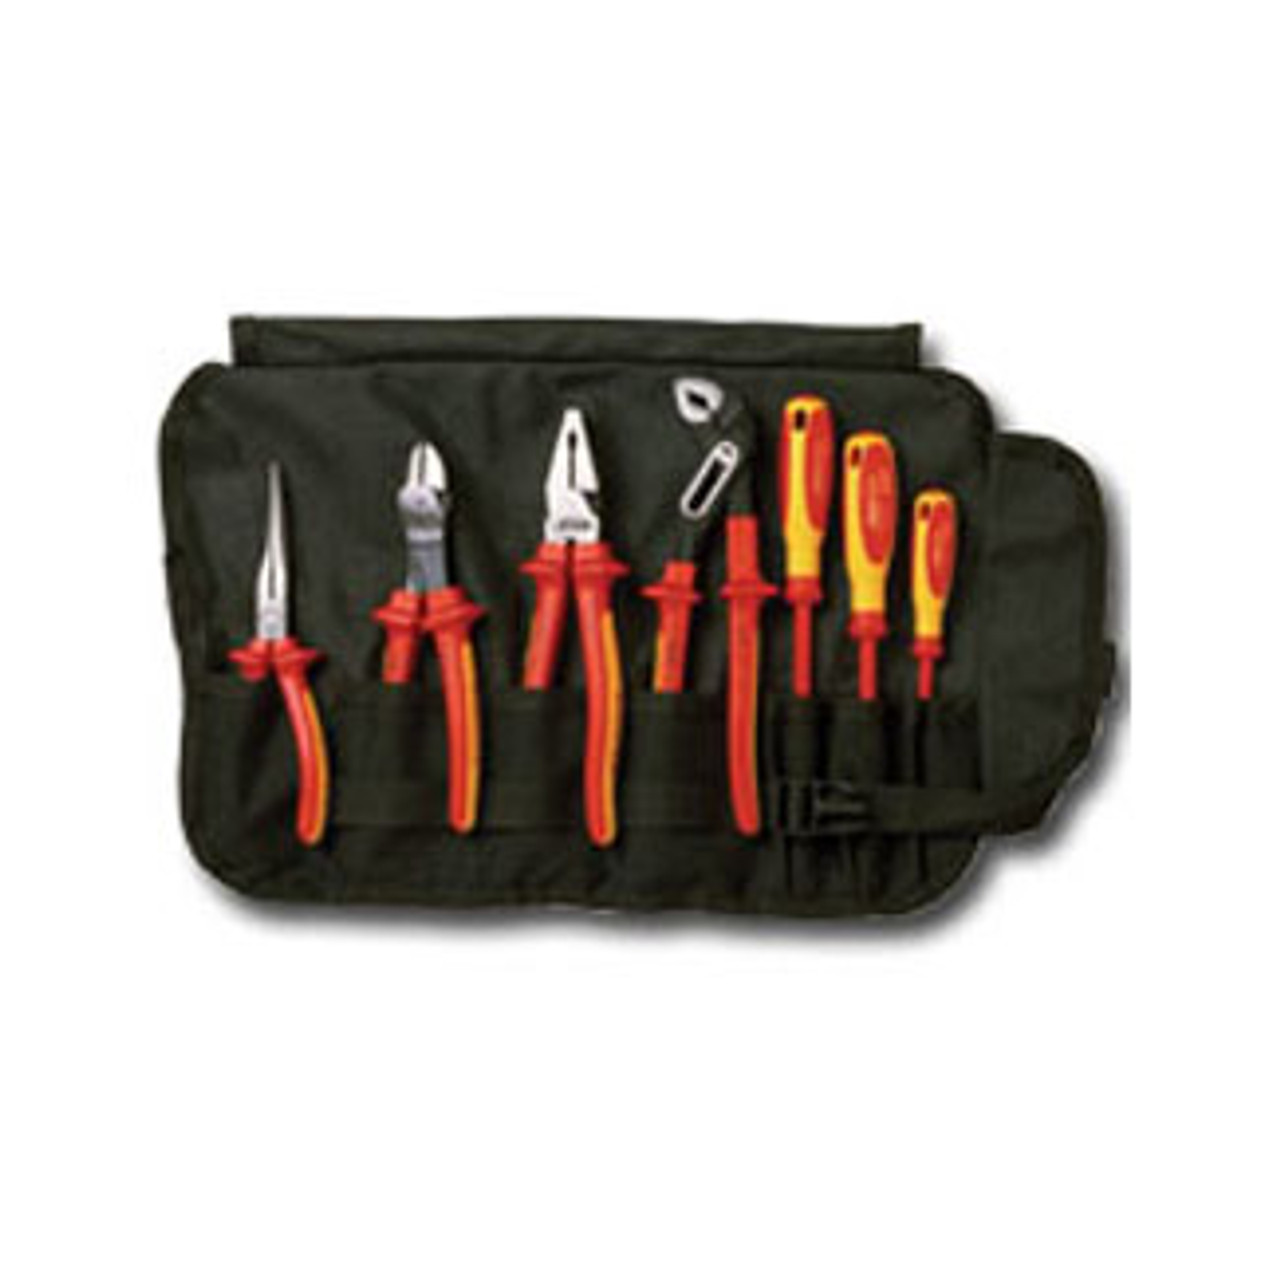 Hybrid Tool Kit for High Voltage Applications